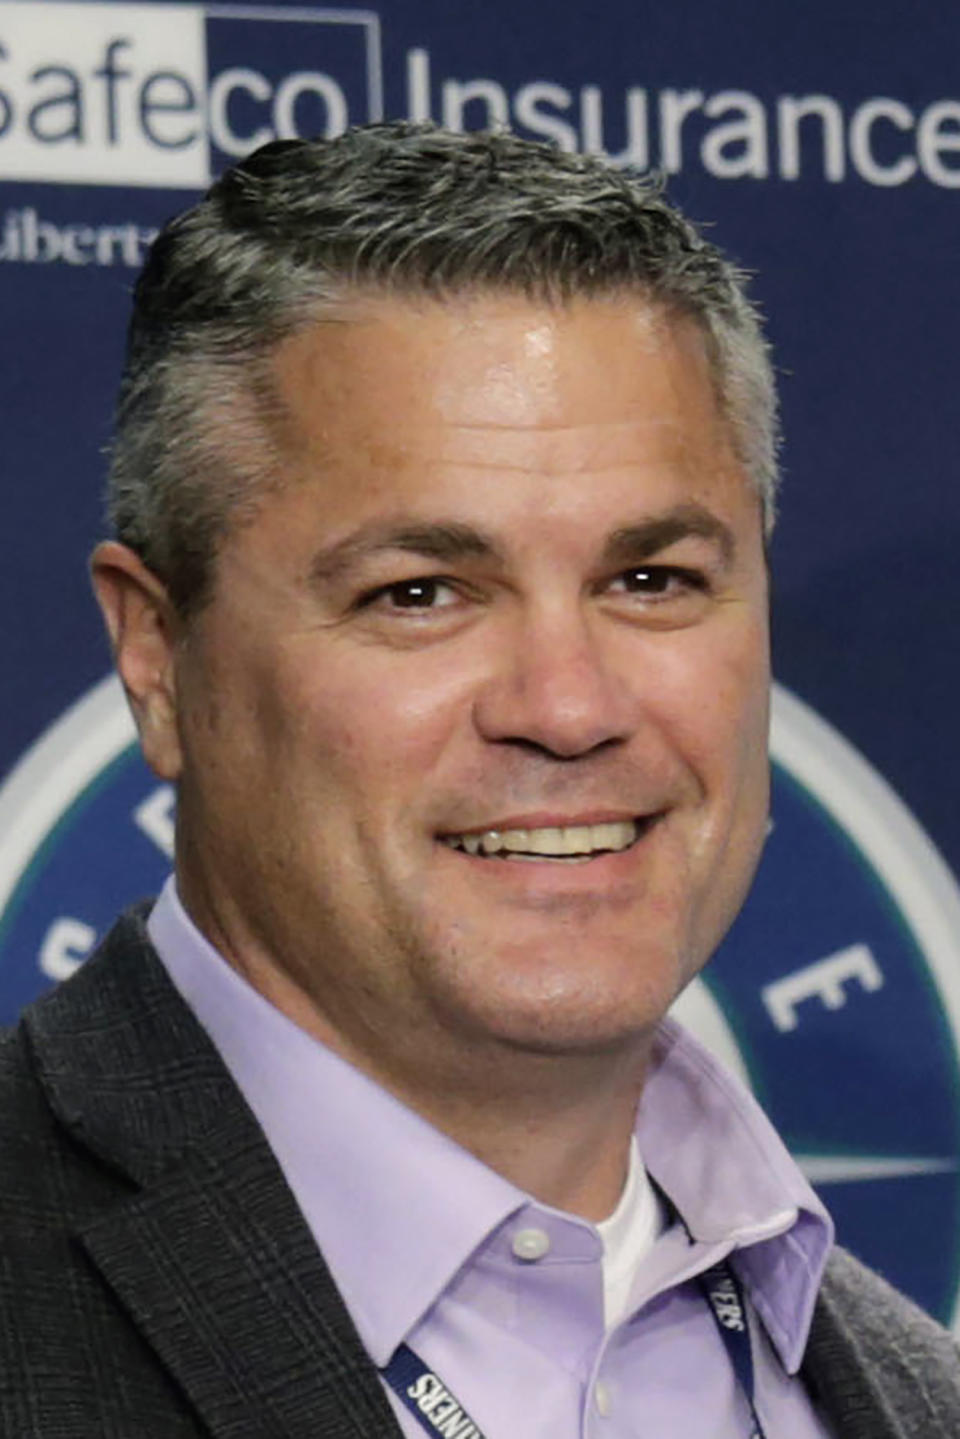 FILE - This is a June 16, 2018, file photo showing Seattle Mariners amateur scouting director Scott Hunter during a news conference in Seattle. Hundreds of young baseball players who would usually be celebrating being drafted by major league teams are now in limbo after the Major League Baseball draft was shortened from 40 rounds to five because of the coronavirus pandemic. "I do see college baseball getting into a little bit of a logjam over the next probably 18 months," Hunter said. (AP Photo/John Froschauer, FIle)